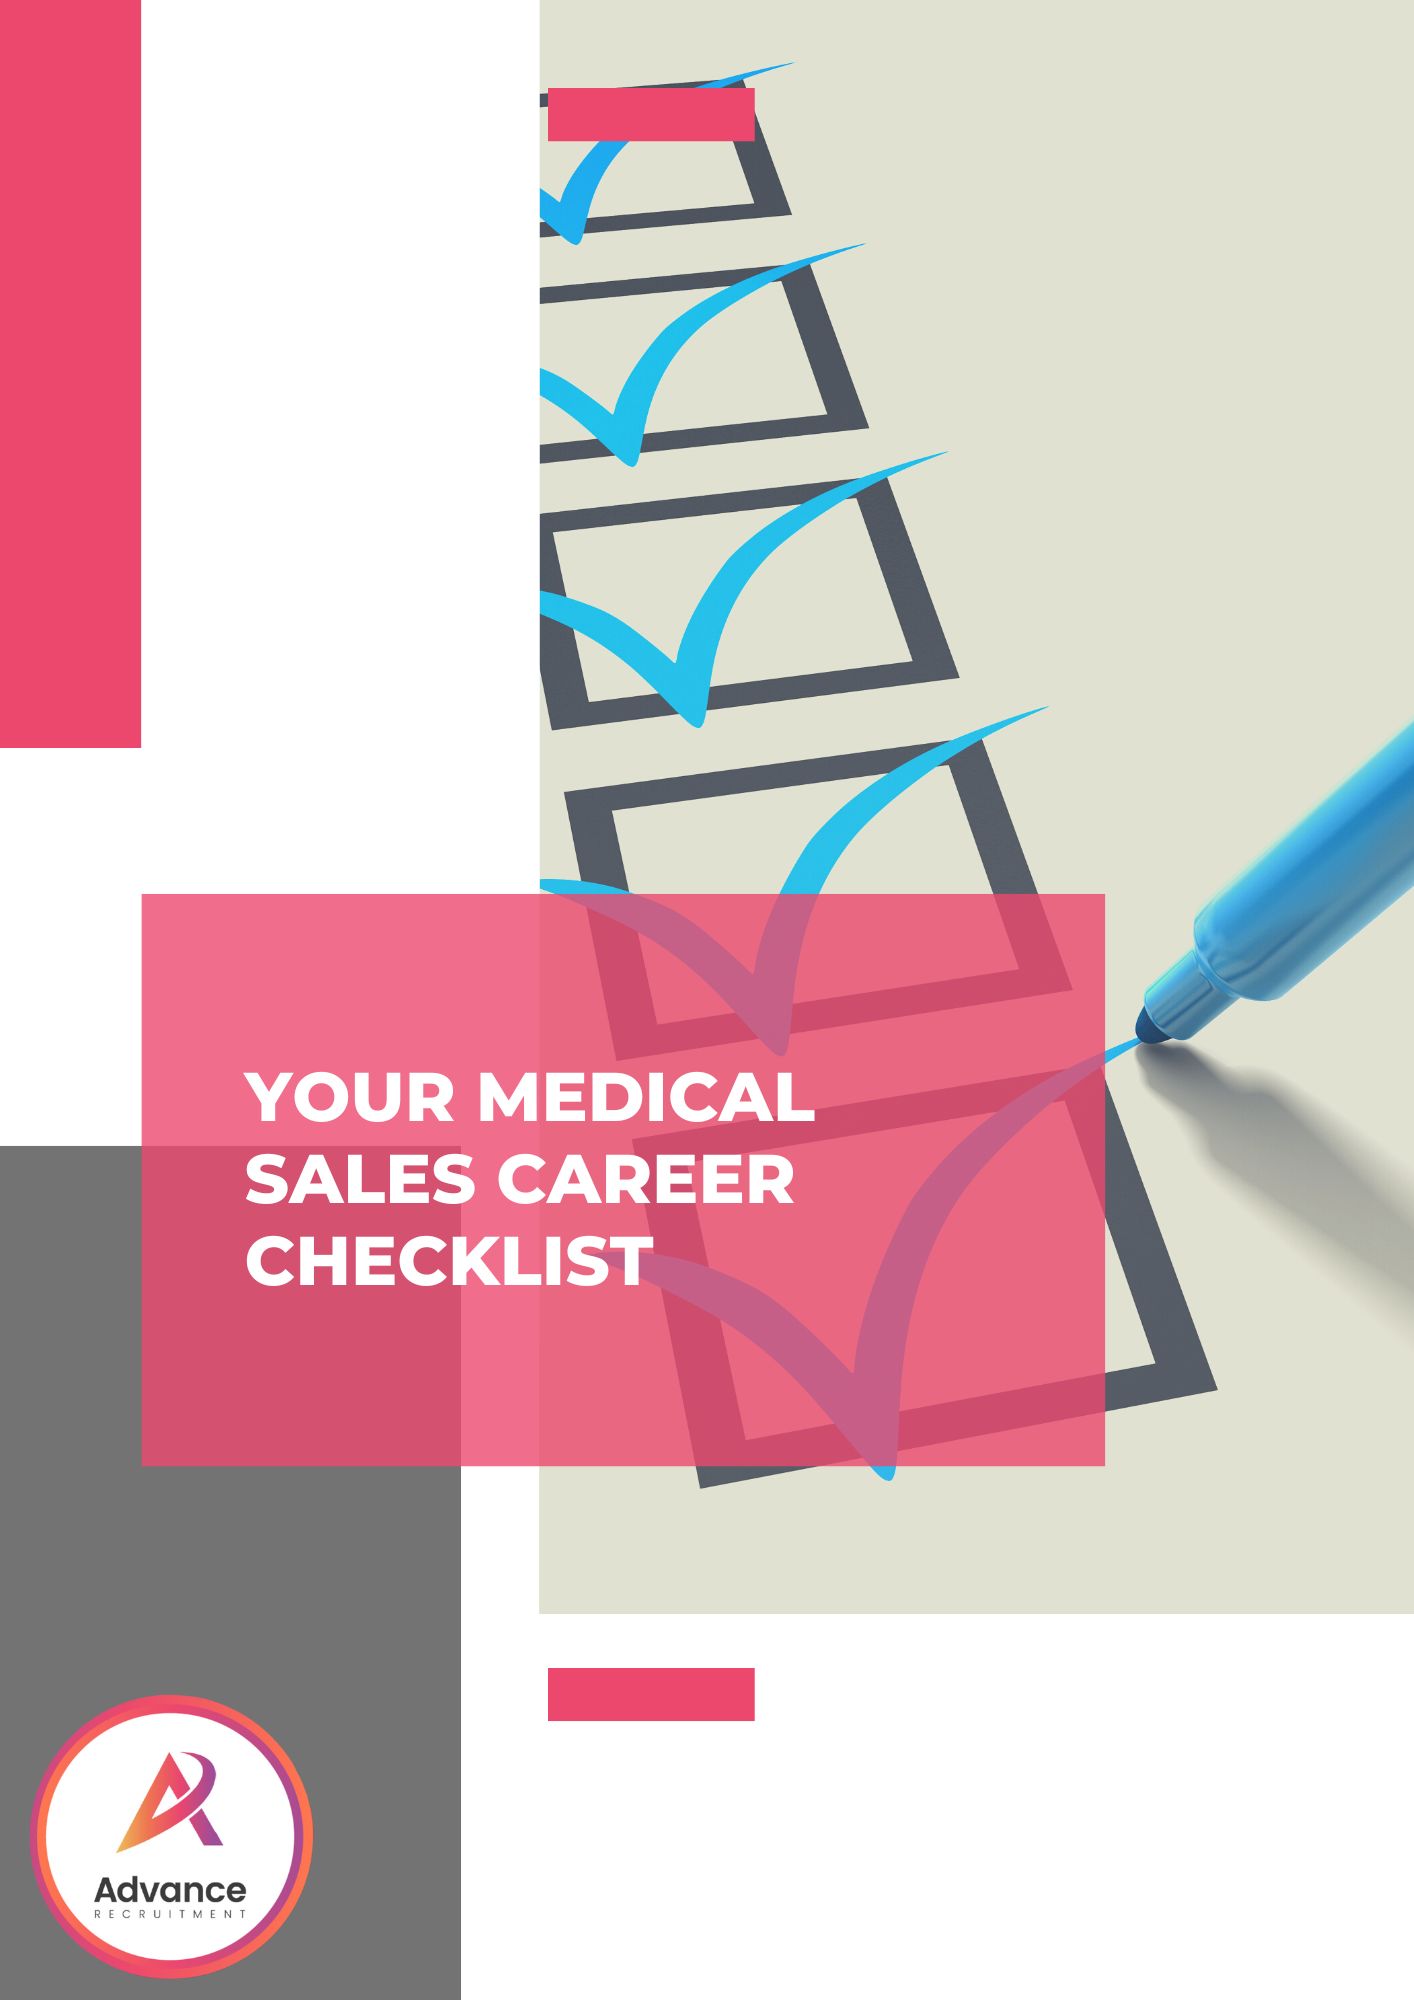 Your Medical Sales Career Checklist